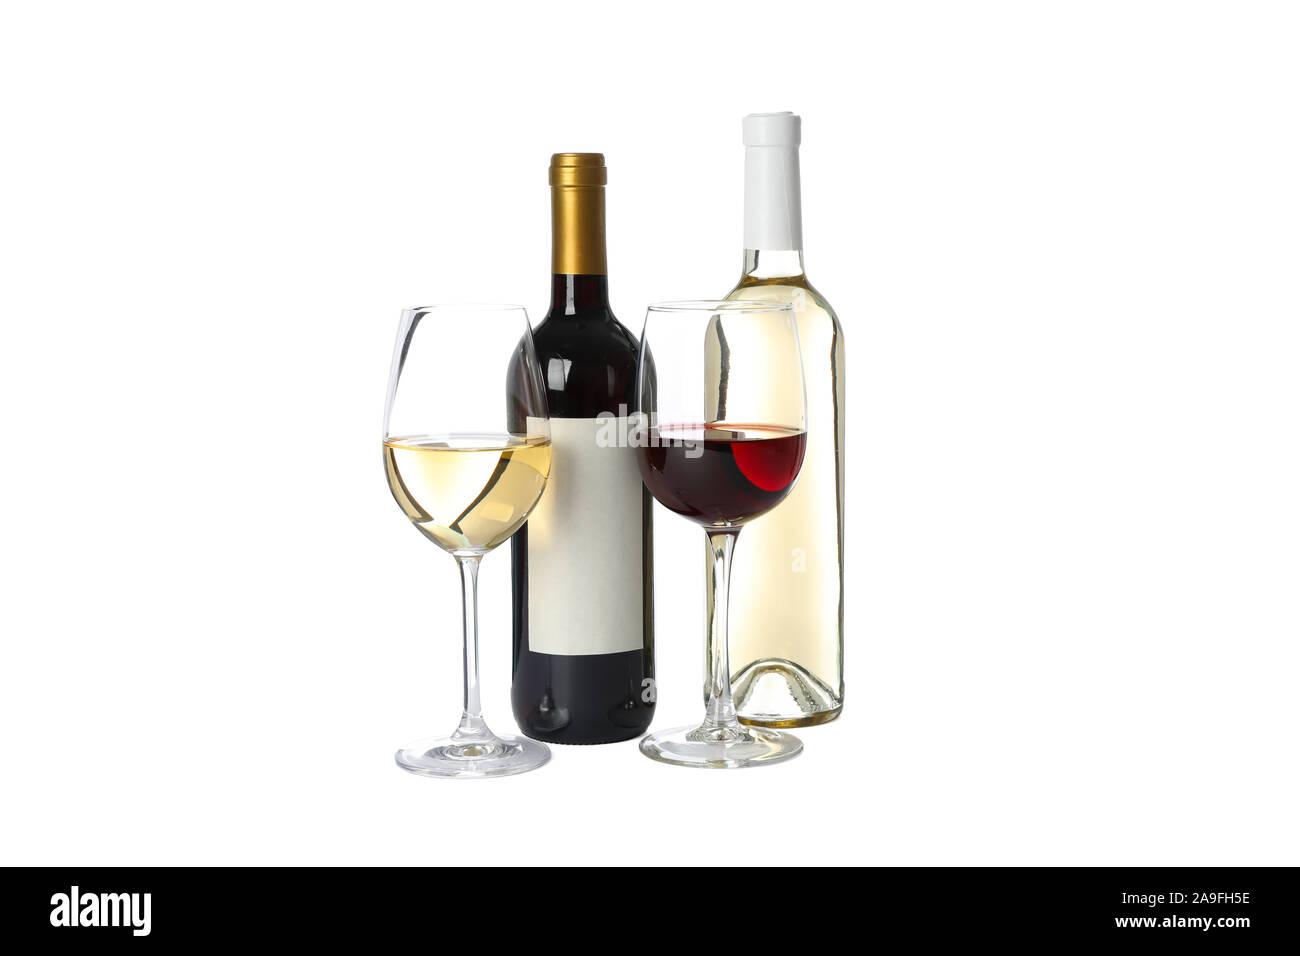 https://c8.alamy.com/comp/2A9FH5E/bottles-and-glasses-with-wine-isolated-on-white-background-2A9FH5E.jpg